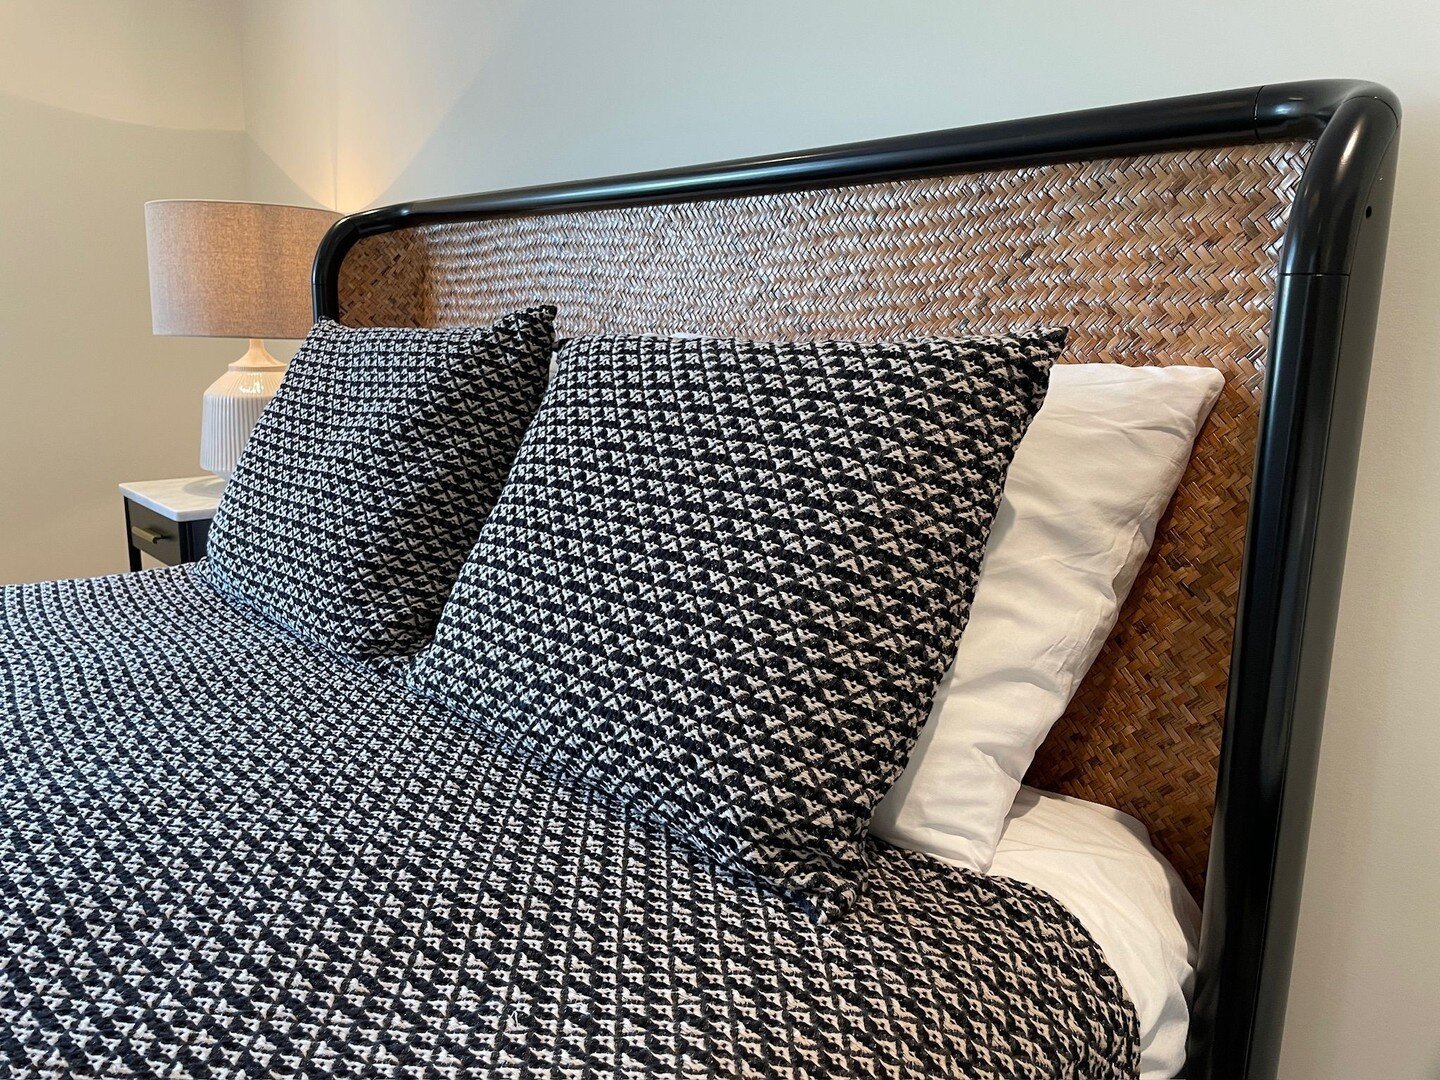 In love with this glossy black natural rattan bed from @cb2 . Paired with this raised black and beige graphic pattern duvet 😍 
.
.
.
.
.
.
.
.
.
.
.
.
.
#interiordesigner #interiordesignideas #homedecor #homestyling #interiordesign #decor